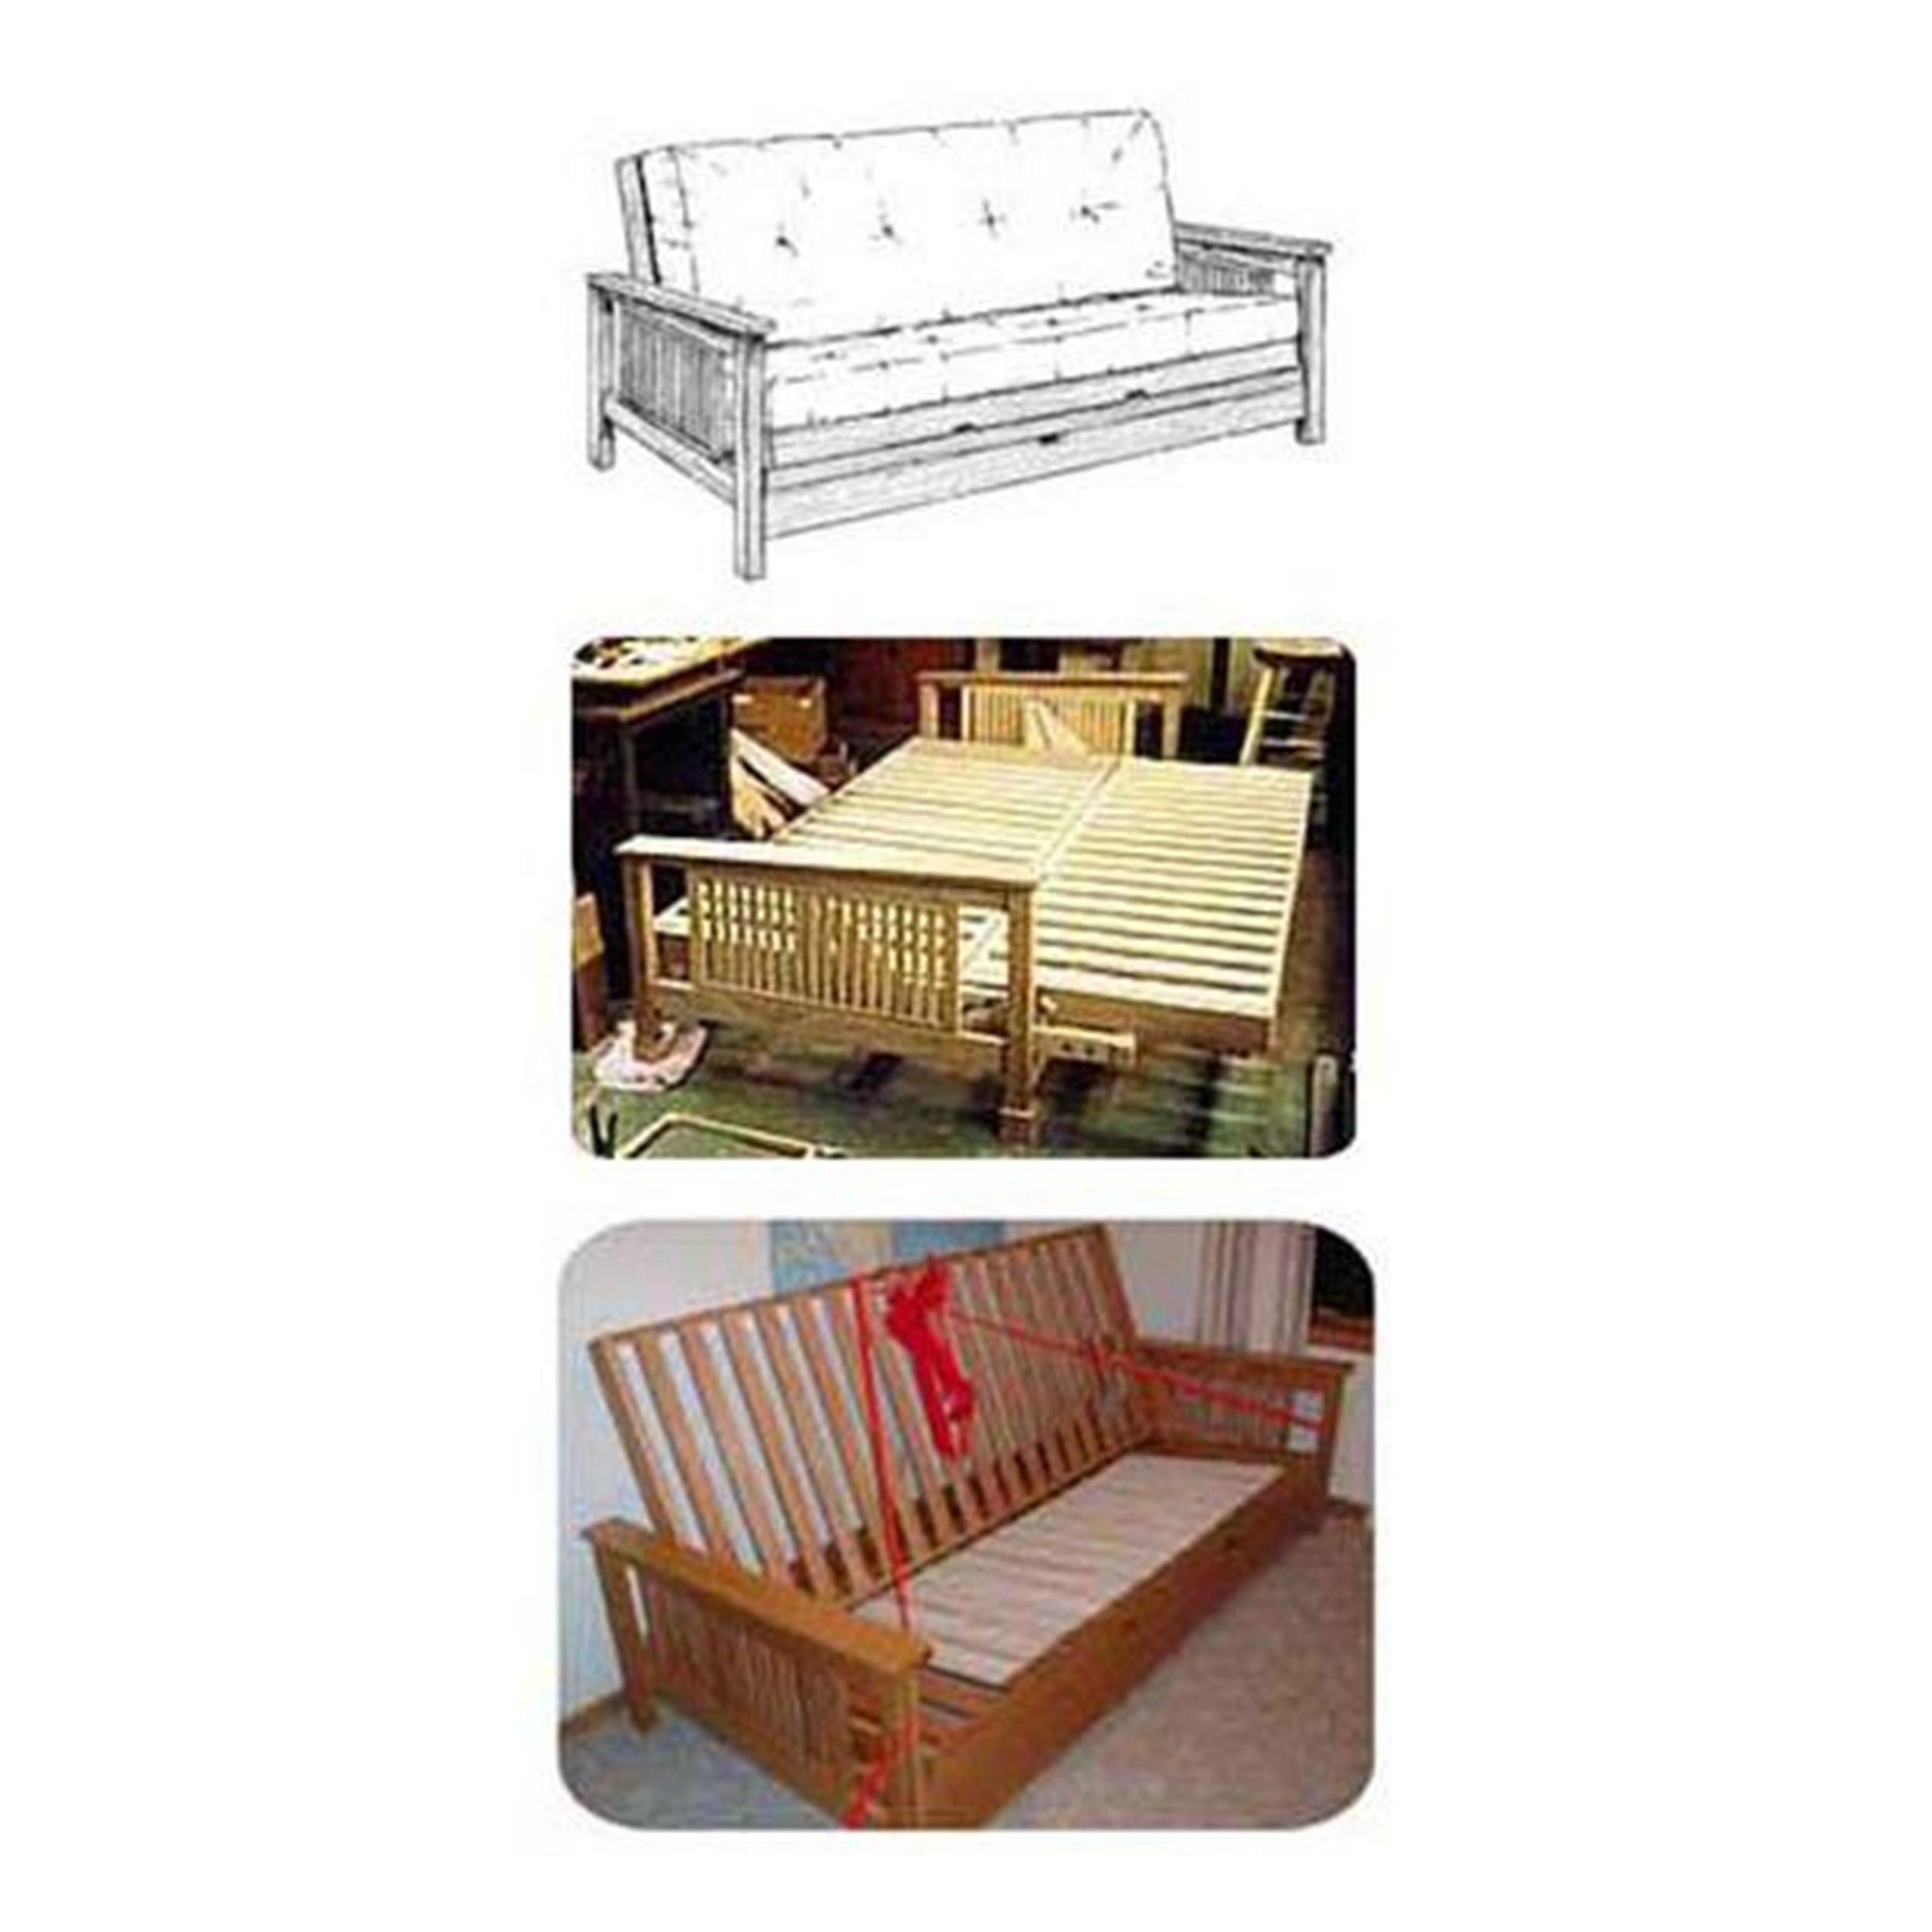 Woodworking Project Paper Plan To Build Mission Couch/futon